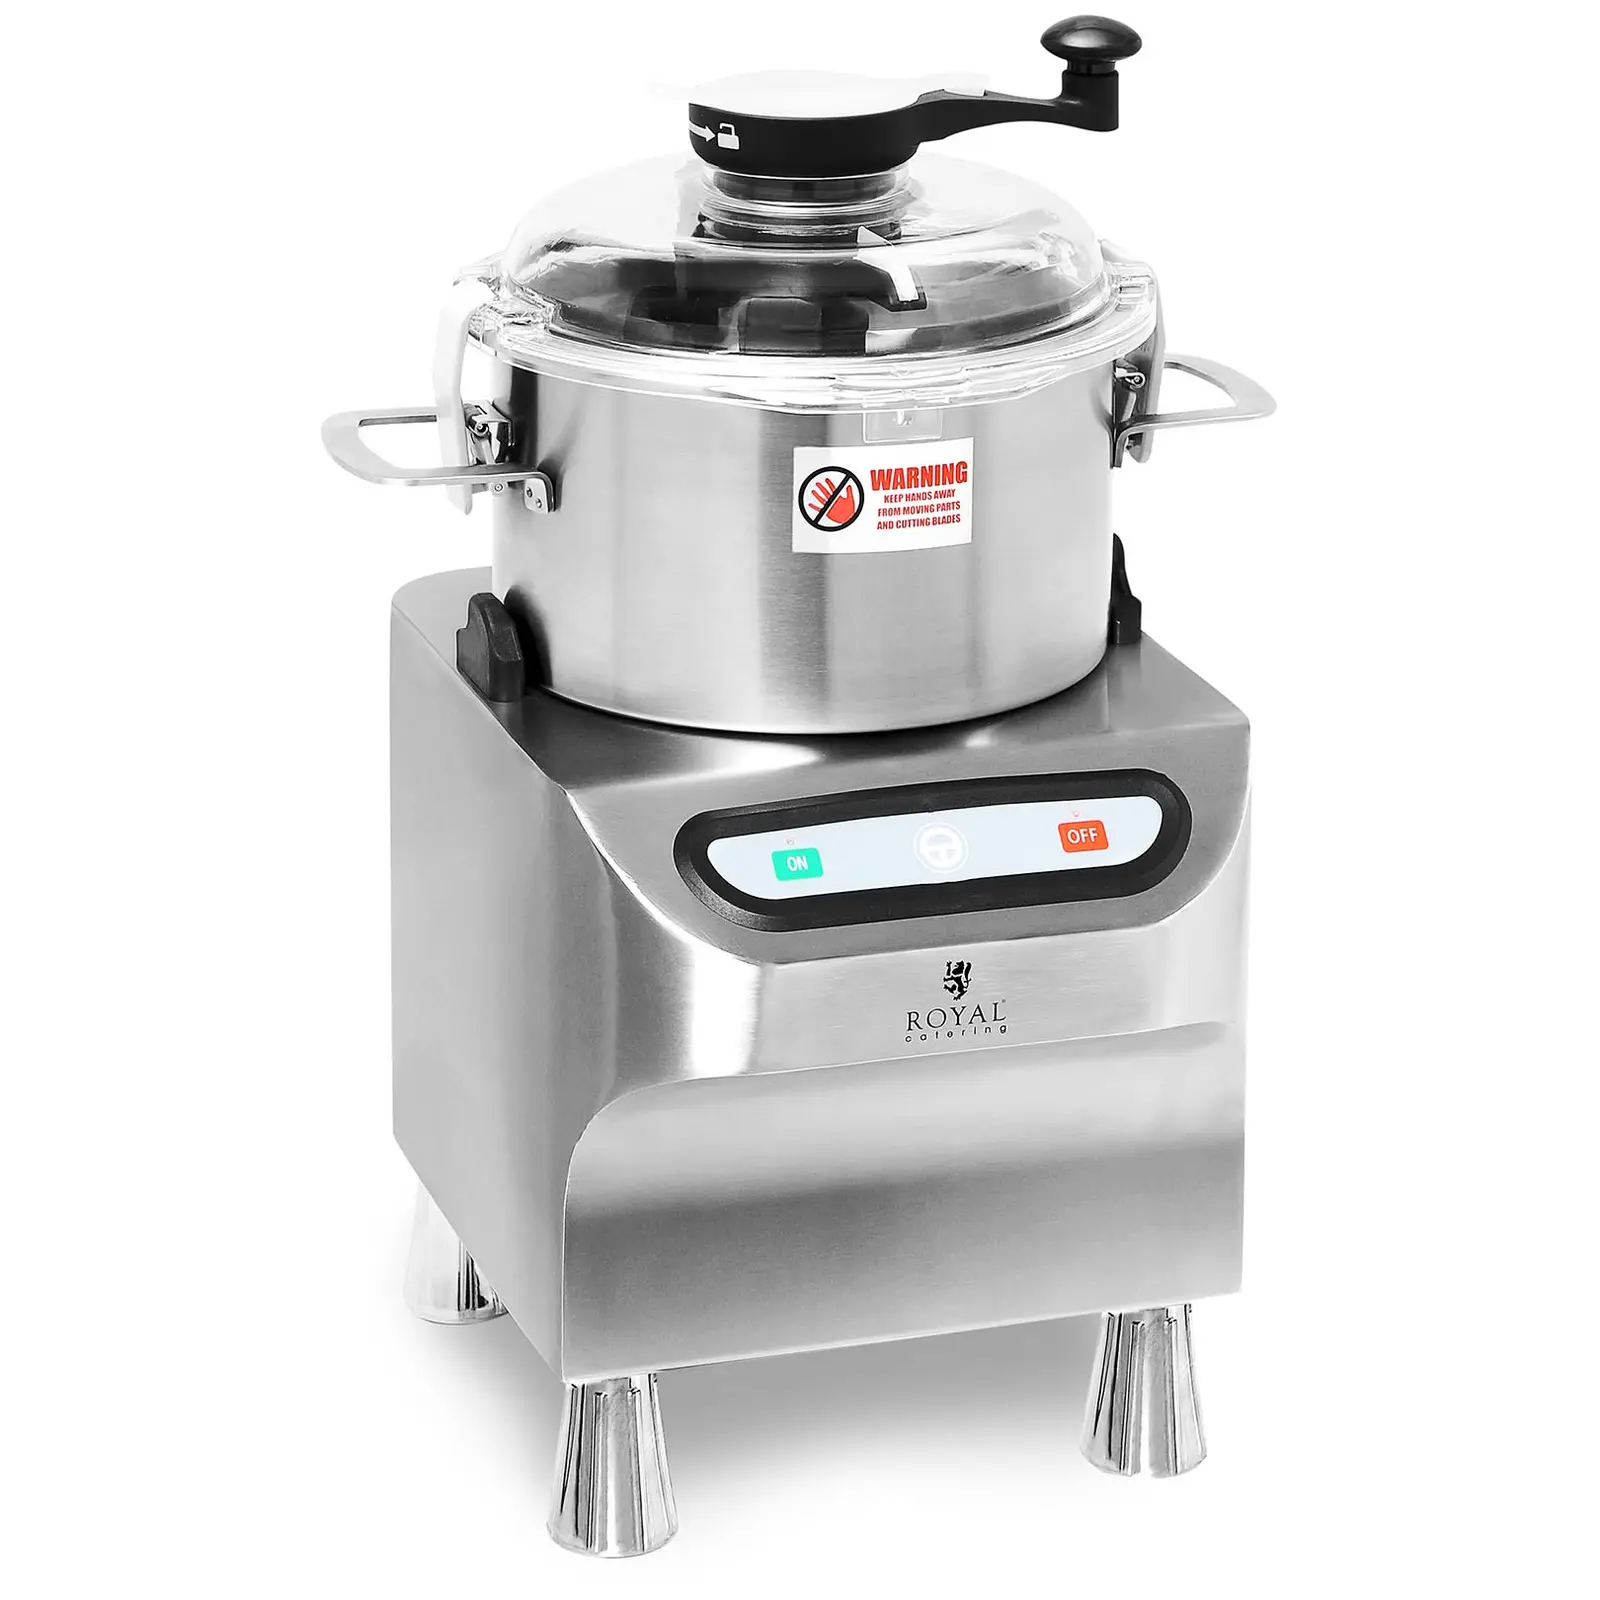 Bowl Cutter - 1500 rpm - Royal Catering - 5 L